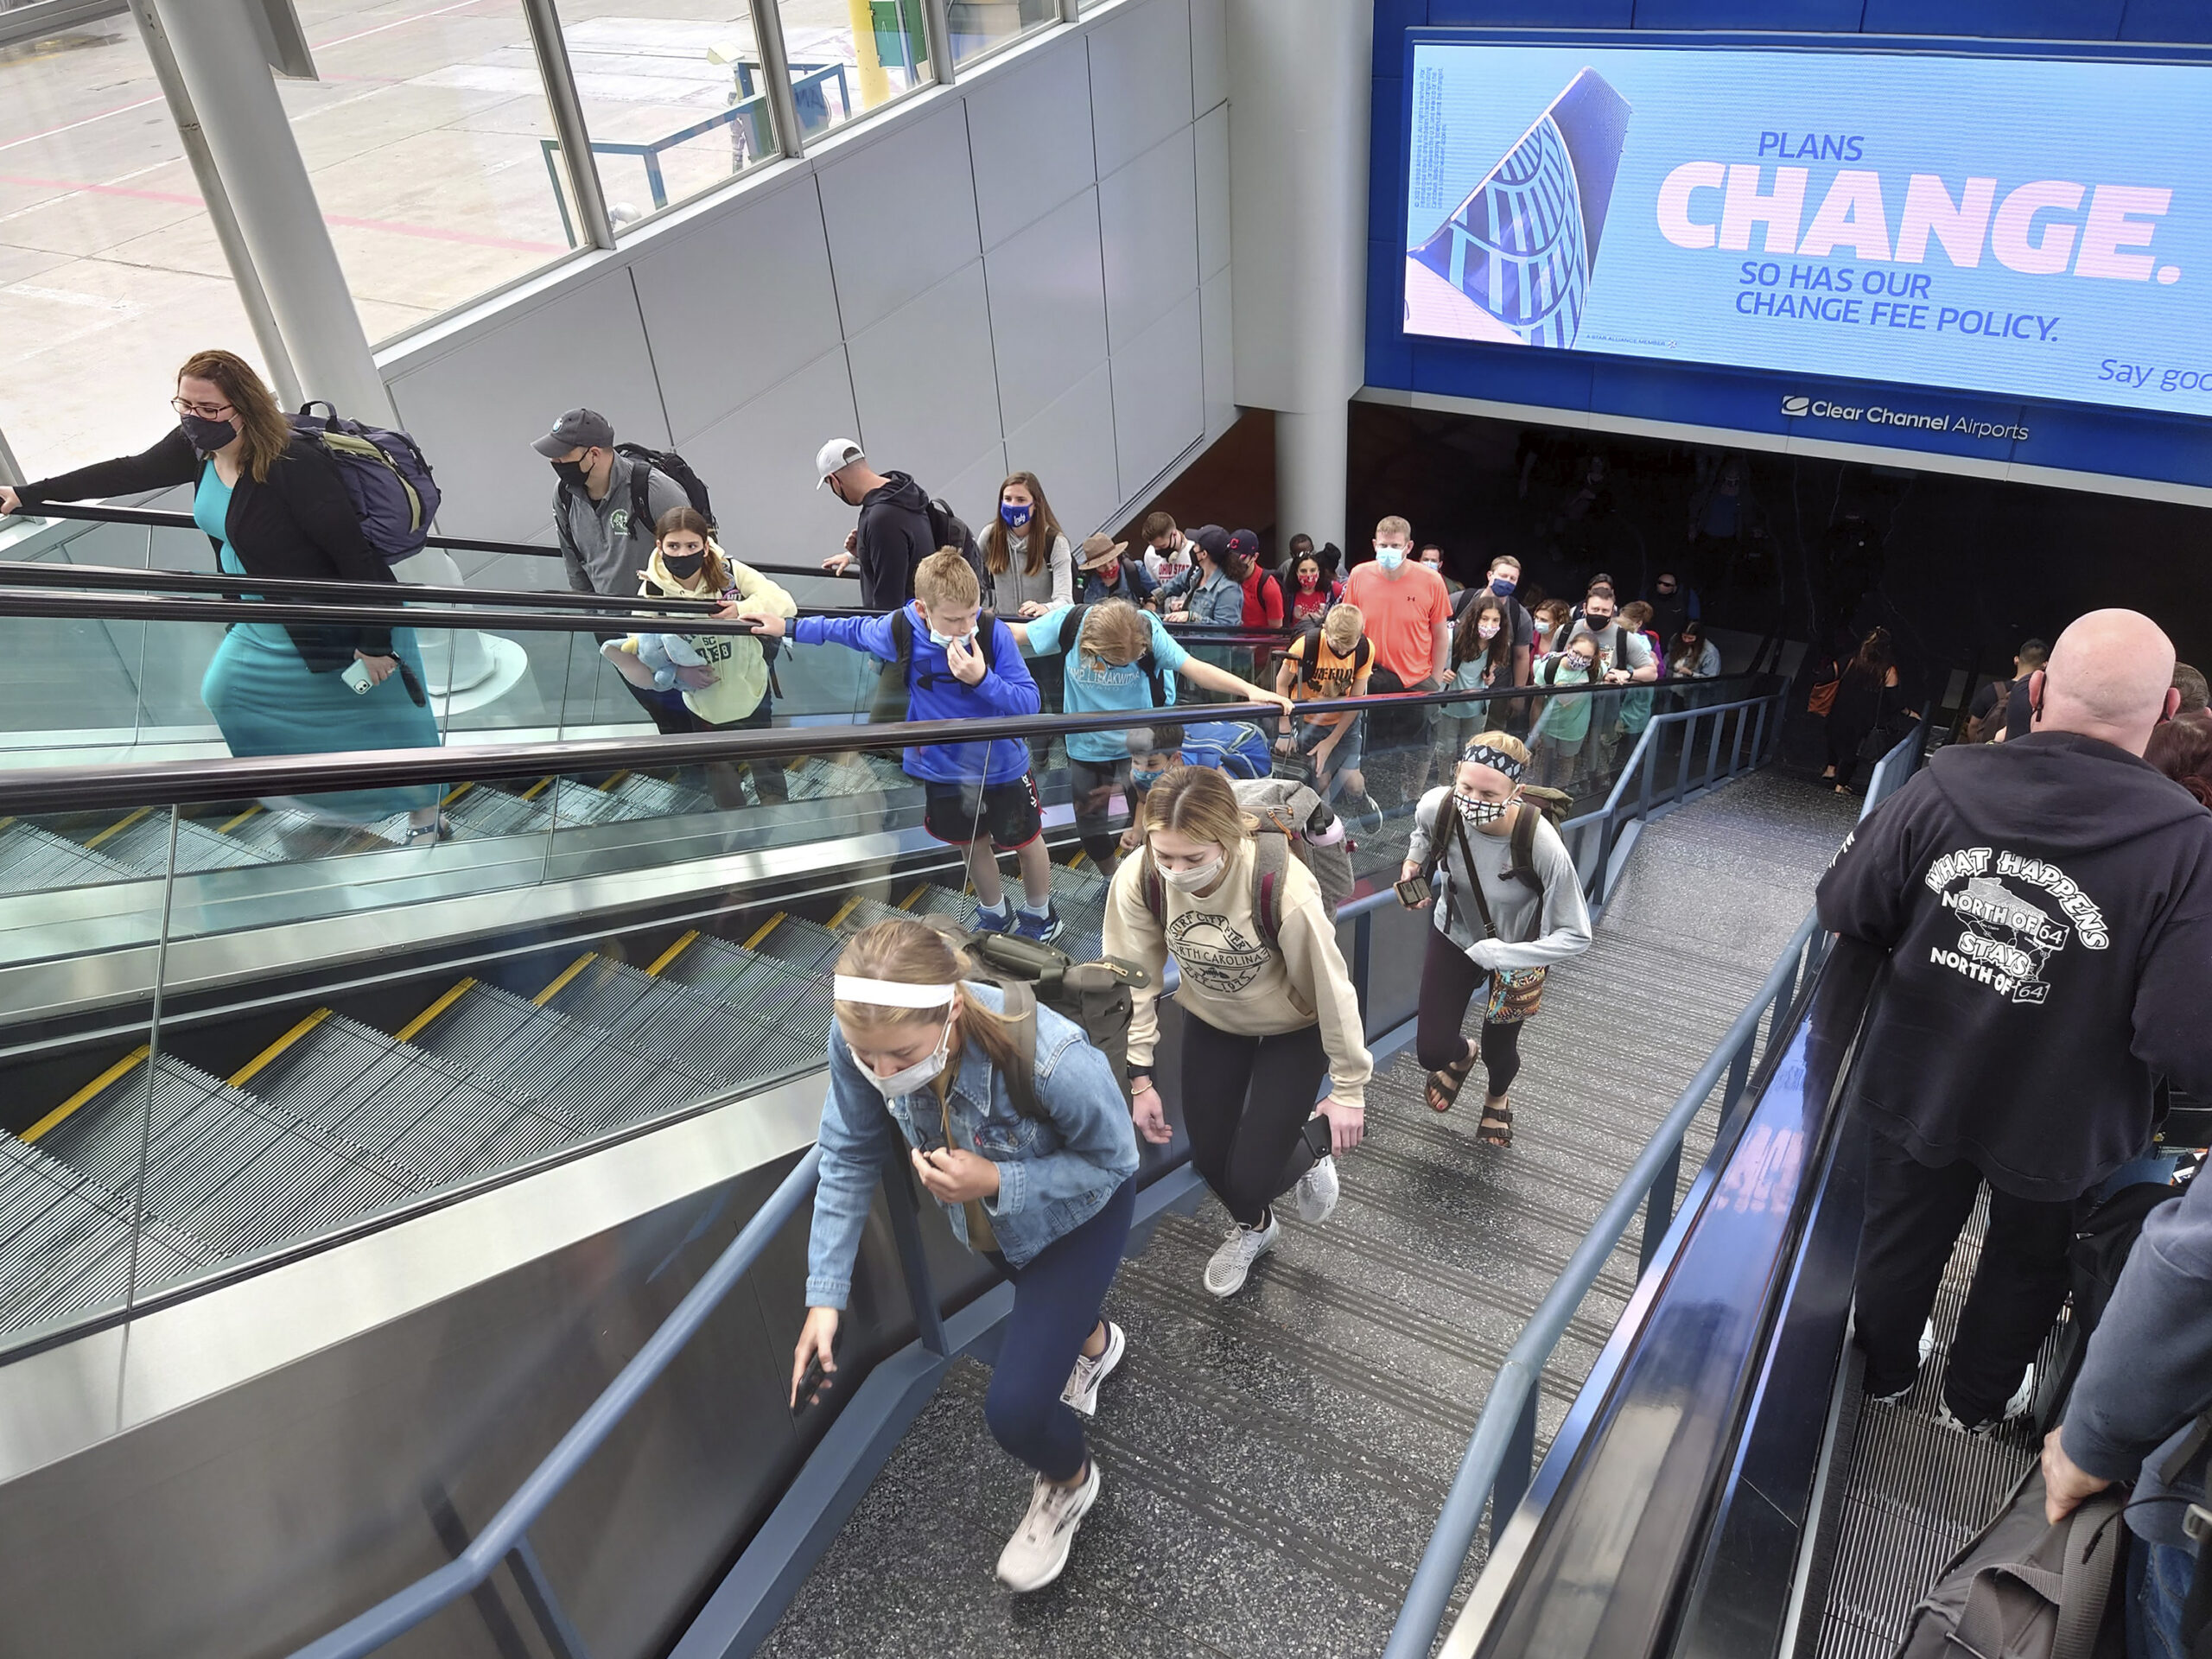 Airline passengers make their way through Chicago O'hare Intercontinental Airport